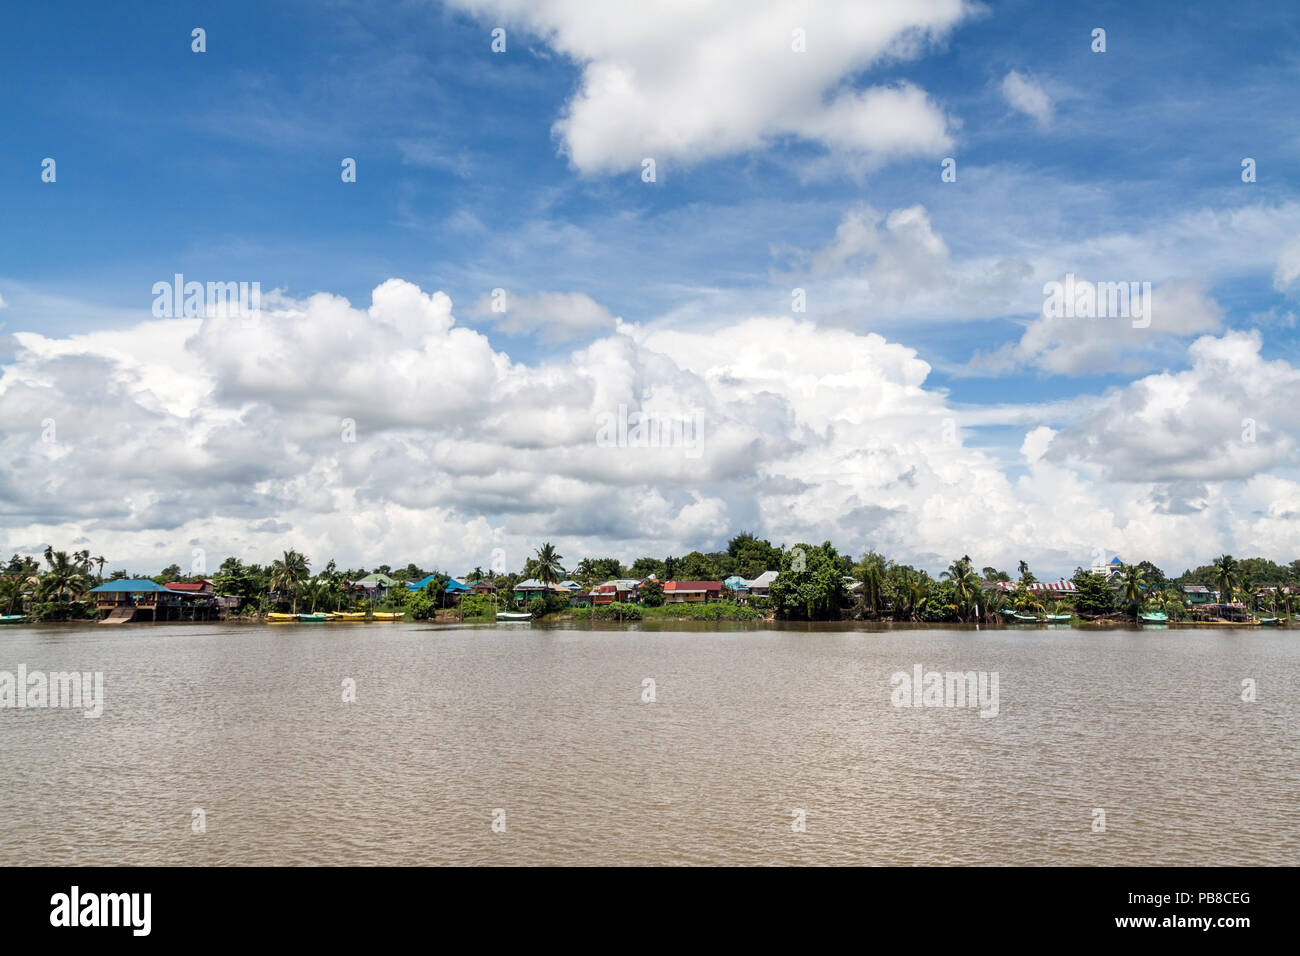 The Sarawak River with traditional rural scenics on the riverside. A beautiful wide angle landscape image of real life conditions in Malaysian Borneo. Stock Photo